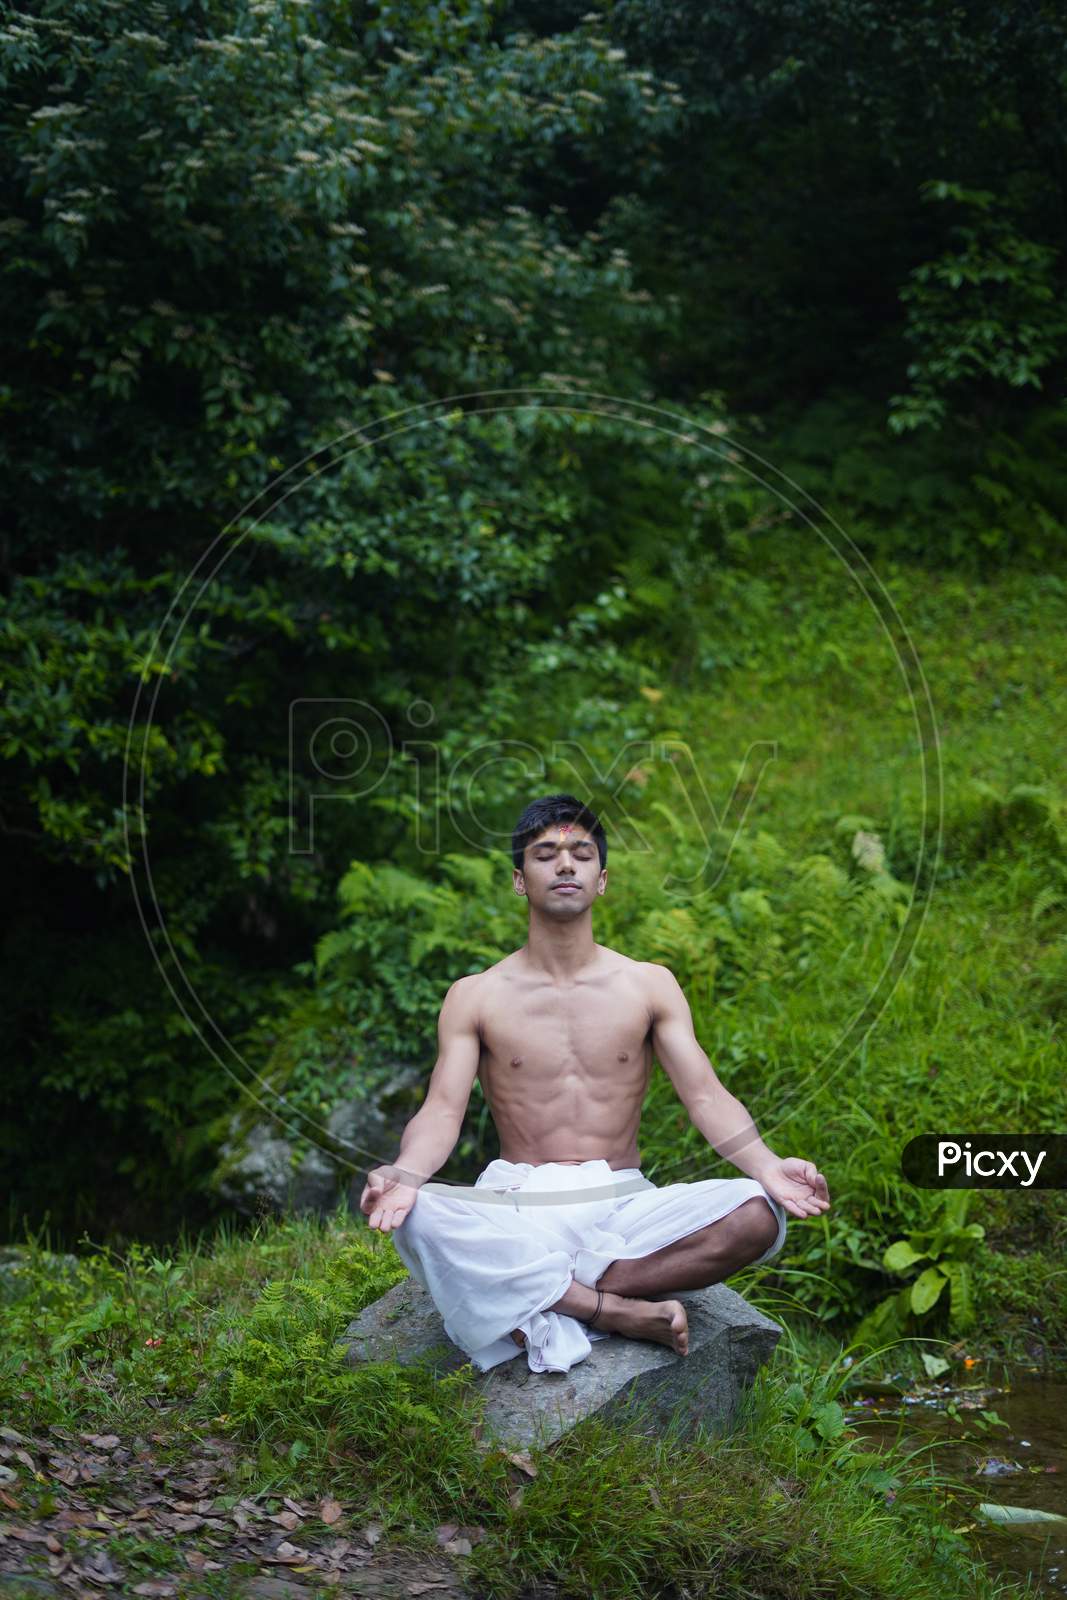 Young Indian Man Doing Yoga While Sitting On A Rock, Wearing A White Dhoti.